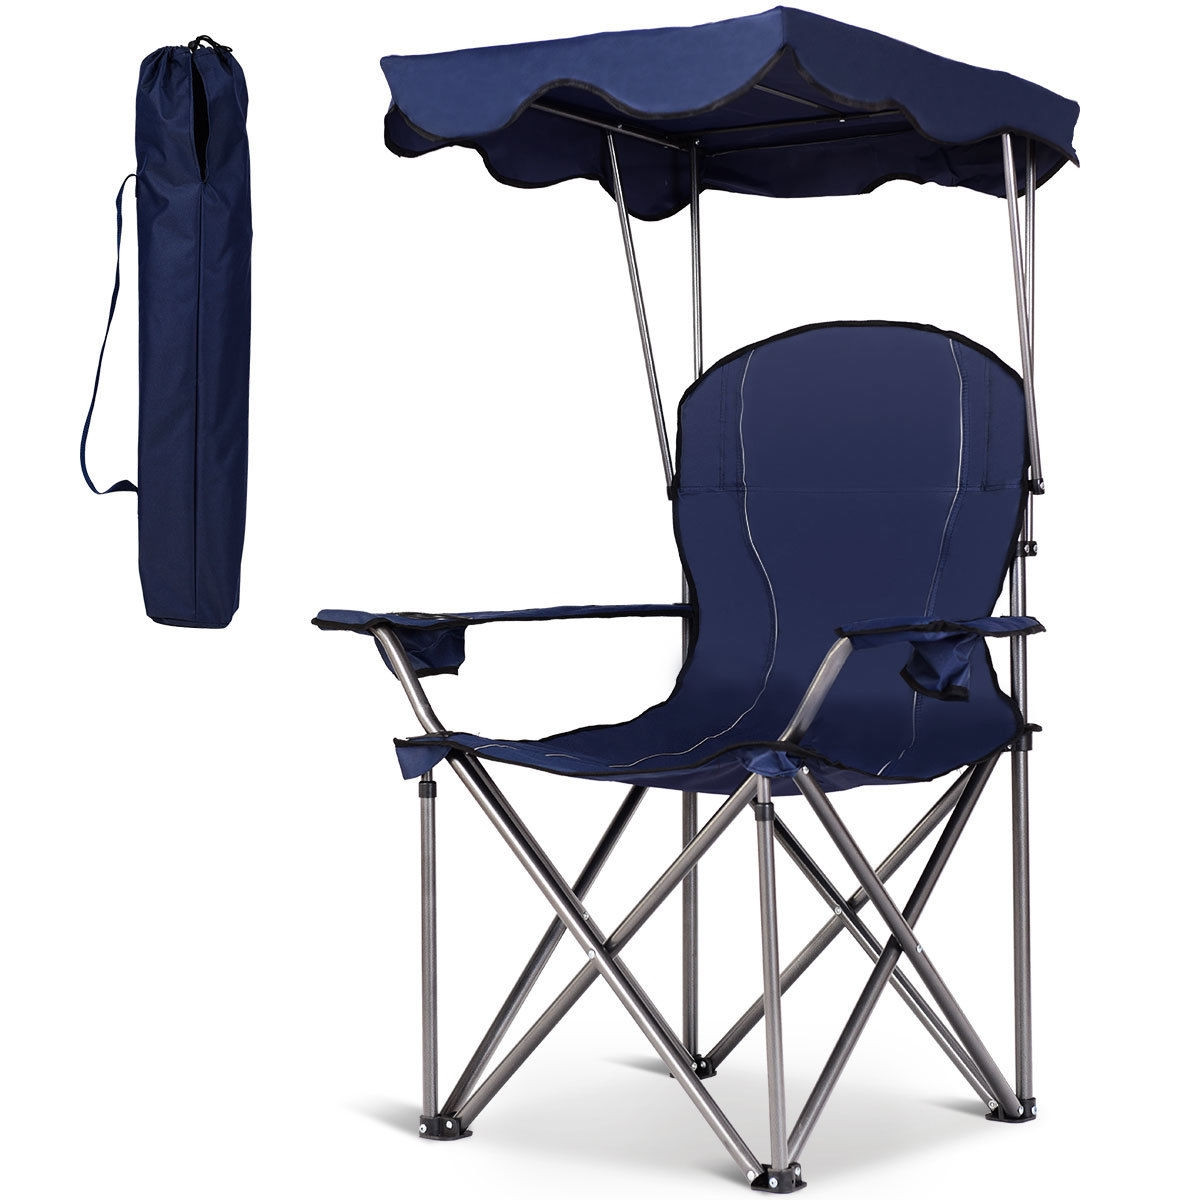 Portable Folding Beach Canopy Chair with Cup Holders - Costway